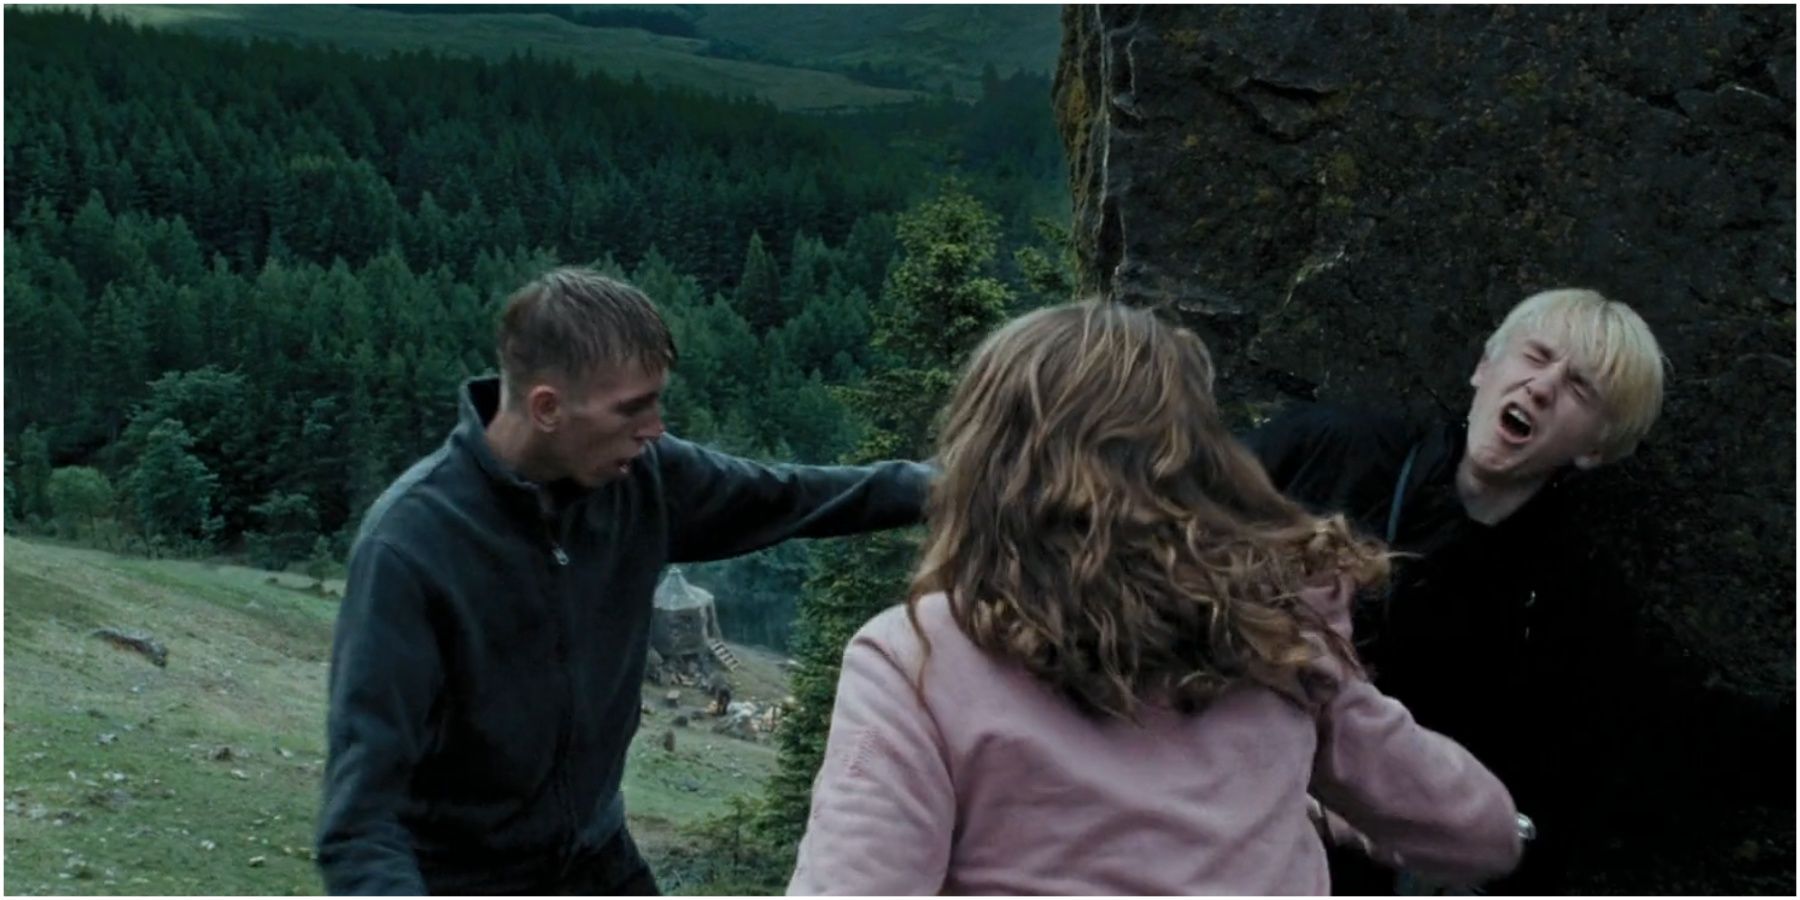 Hermione Granger punches Draco Malfoy in Harry Potter and the Prisoner of Azkaban.